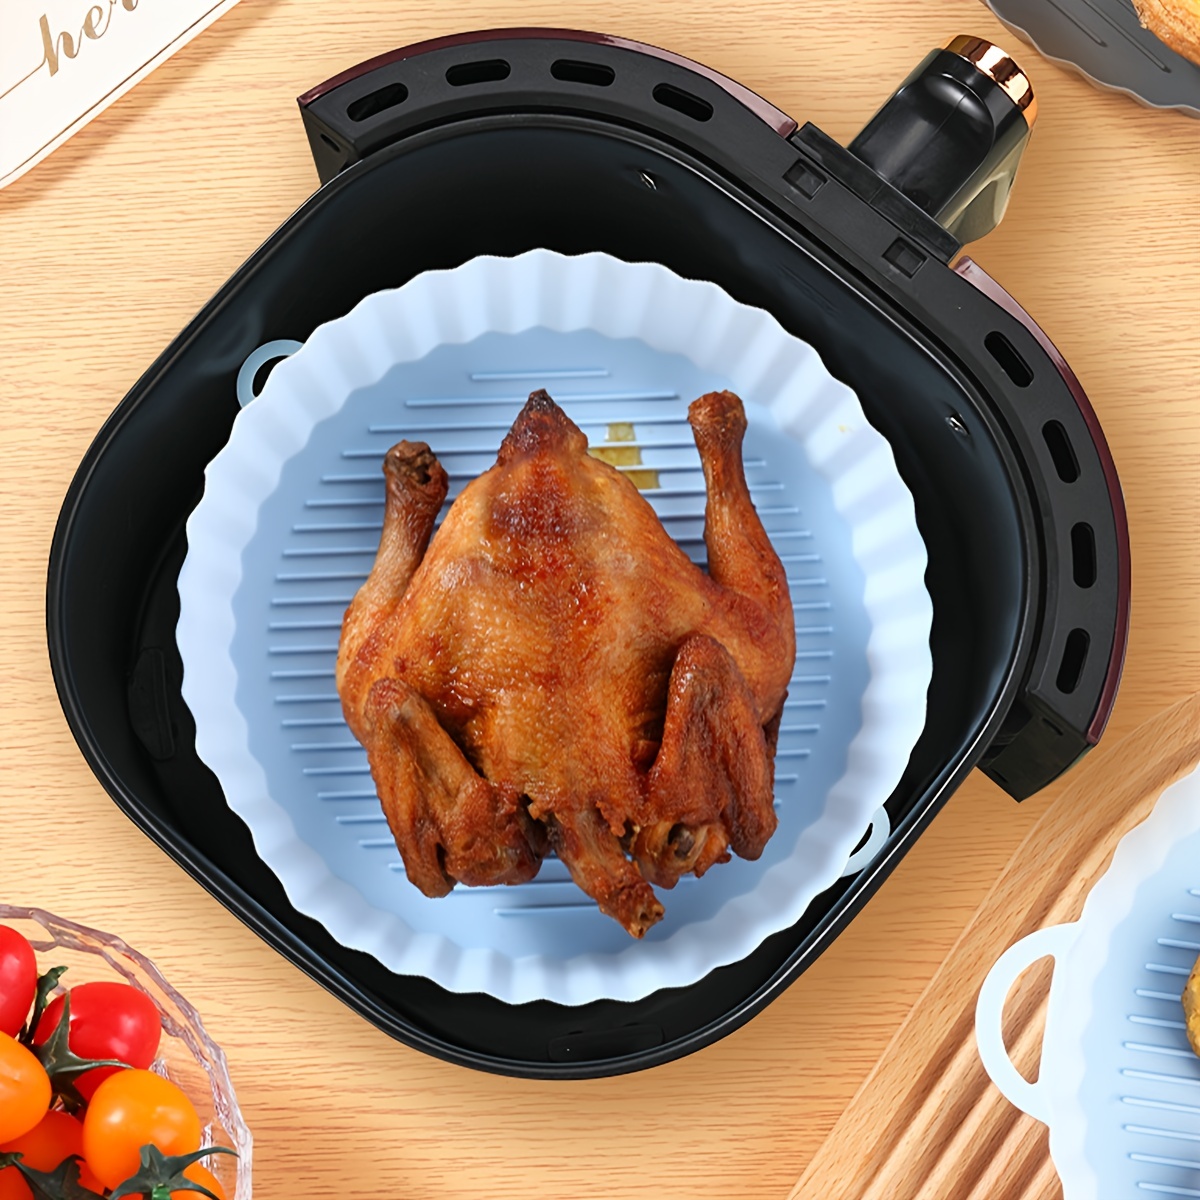  Air Fryer Silicone Baking Tray, Silicone Air Fryer Liner,  Reusable Non-Stick Air Fryer Basket Silicone, for Oven, Air Fryer  Accessories, Microwave Cake Baking Pans etc,Blue: Home & Kitchen